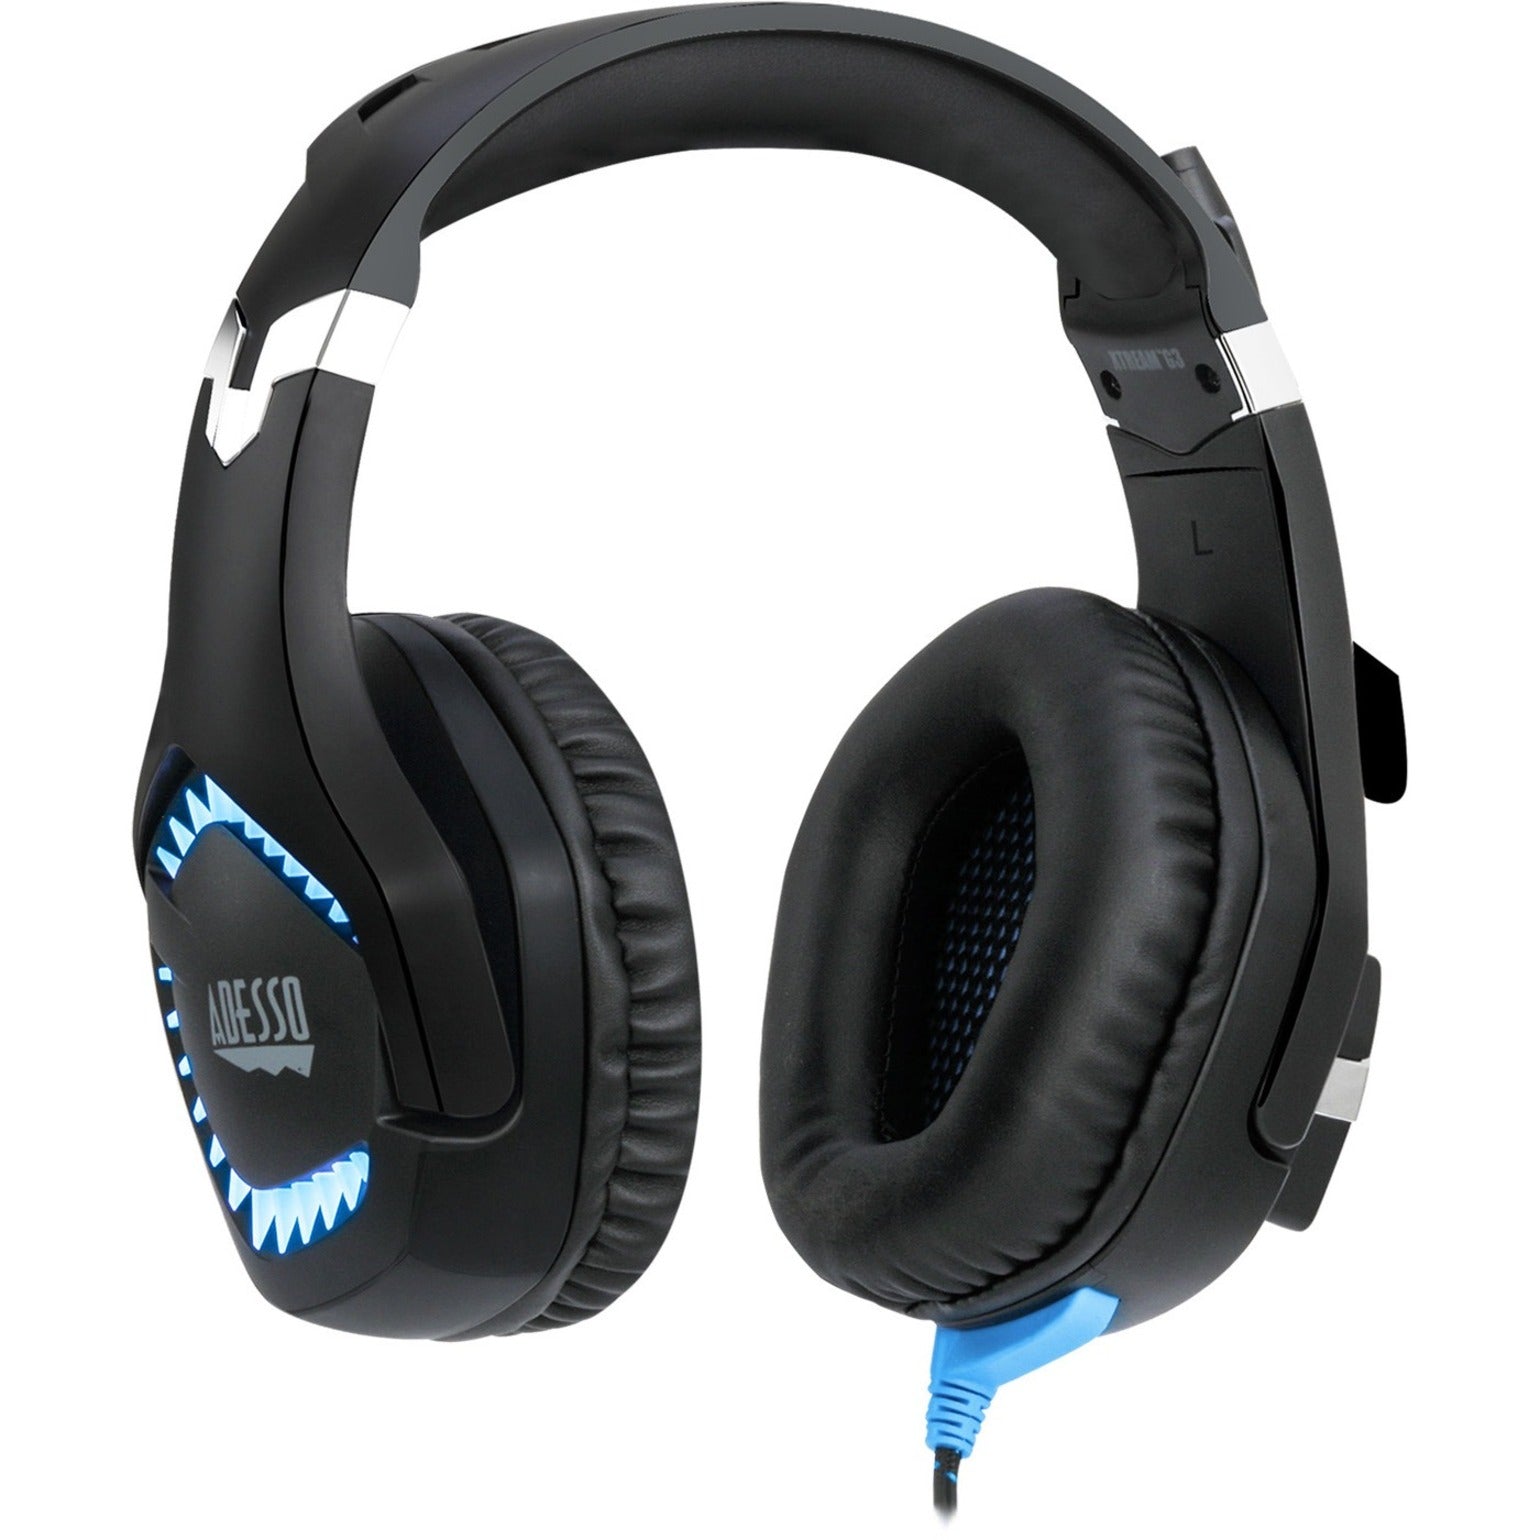 Adesso XTREAM G3 Virtual 7.1 Gaming Headset with Microphone, LED Lighting, Adjustable Headband, 7.1 Surround Sound